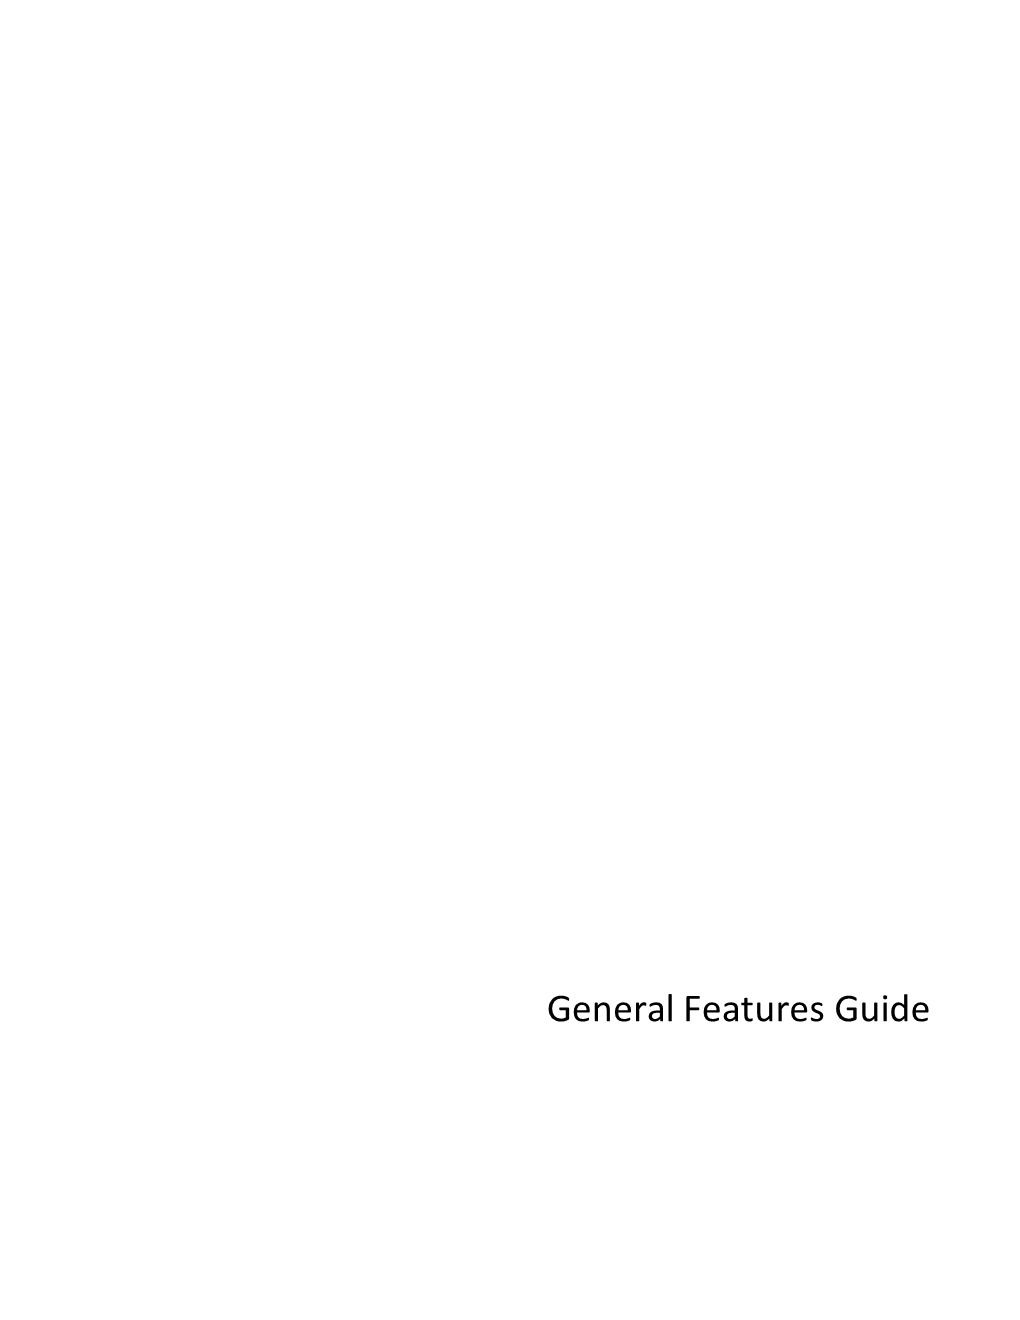 Blackbaud CRM General Features Guide